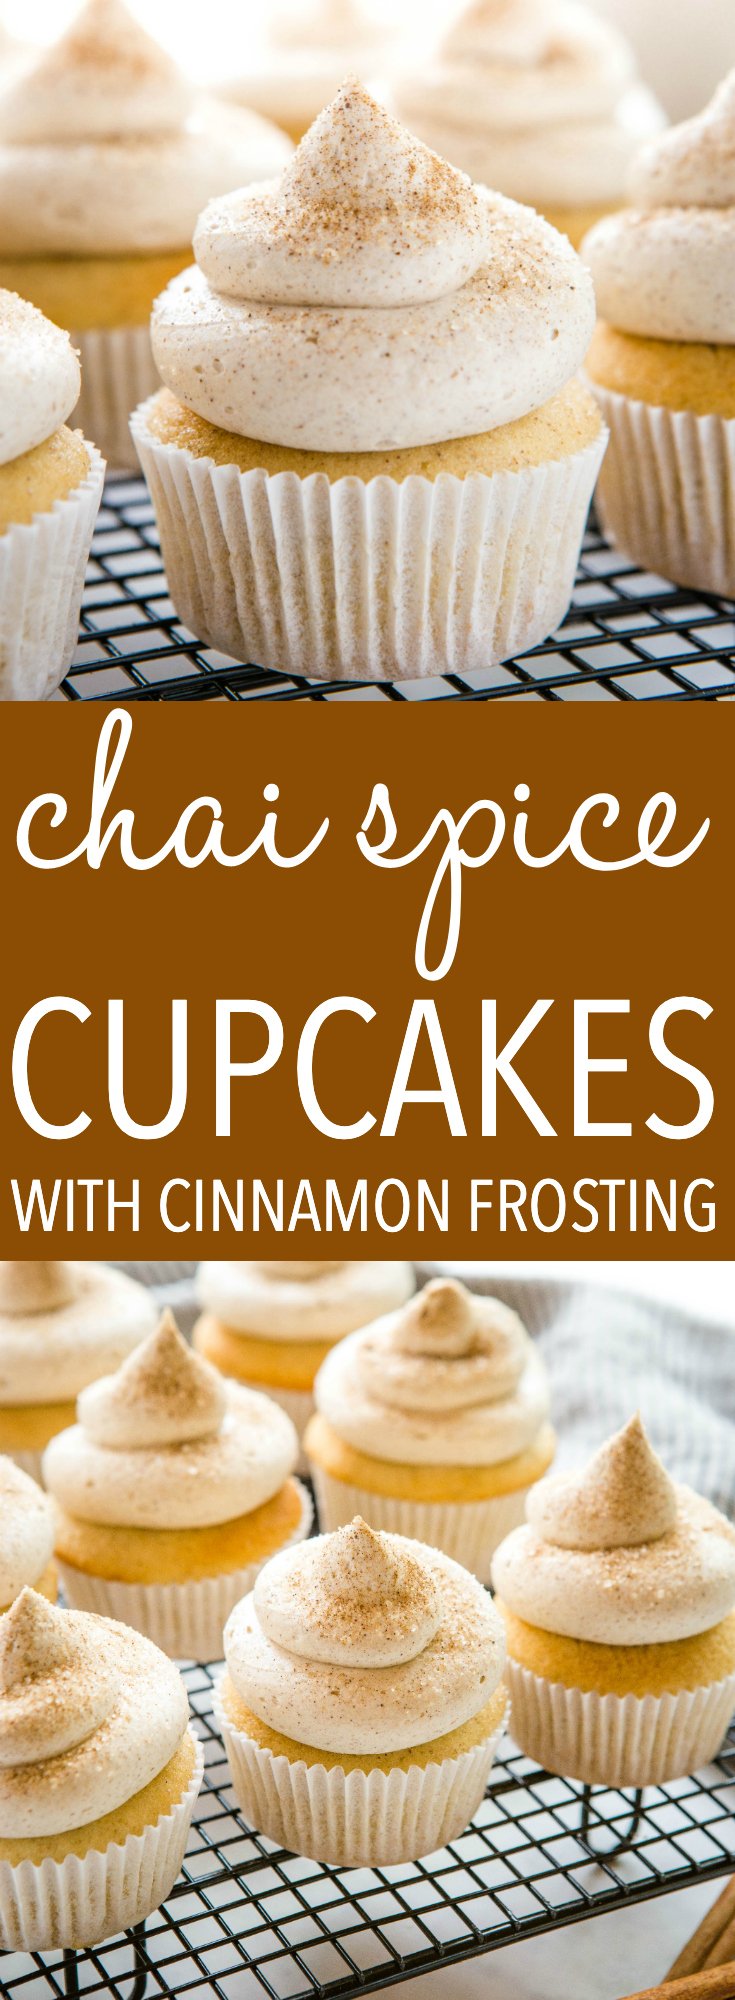 These Chai Spice Cupcakes with Cinnamon Frosting are the perfect warm and comforting dessert for fall and winter! A tender vanilla cupcake infused with cinnamon, cardamom, and ginger topped with a sweet cinnamon buttercream. Recipe from thebusybaker.ca! #chai #chailatte #cupcakes #tea #comfortfood #winter #fall #cinnamon #cardamom #ginger #spice via @busybakerblog